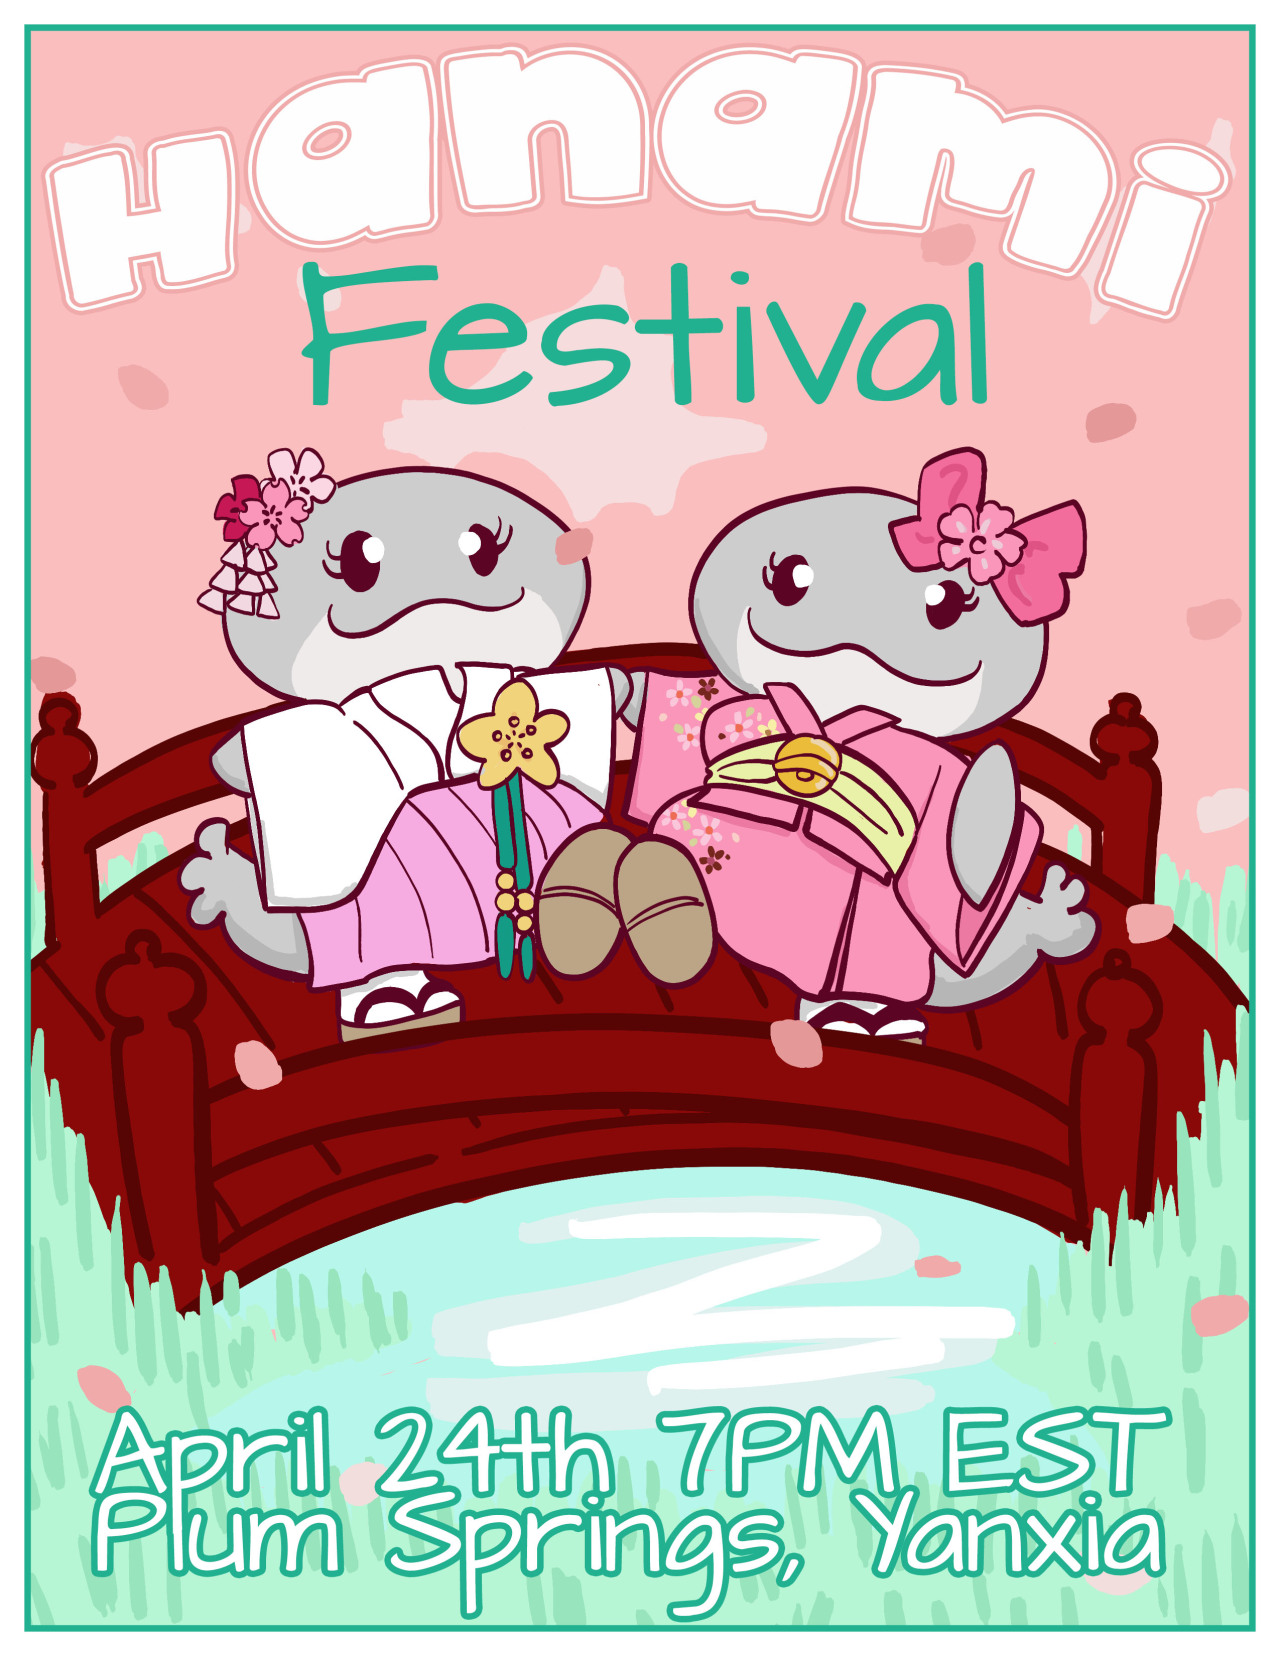 for-gold-and-glory:
“[Balmung] Hanami Festival
Saturday April 24th 7:00 EST @ Plum Springs, YanxiaOn behalf of Grand Summoner Hanami
(A new legend emerges!)
What’s this? Where is Princess Ebisu?
Grand Summoner Hanami invites you to join us for a...